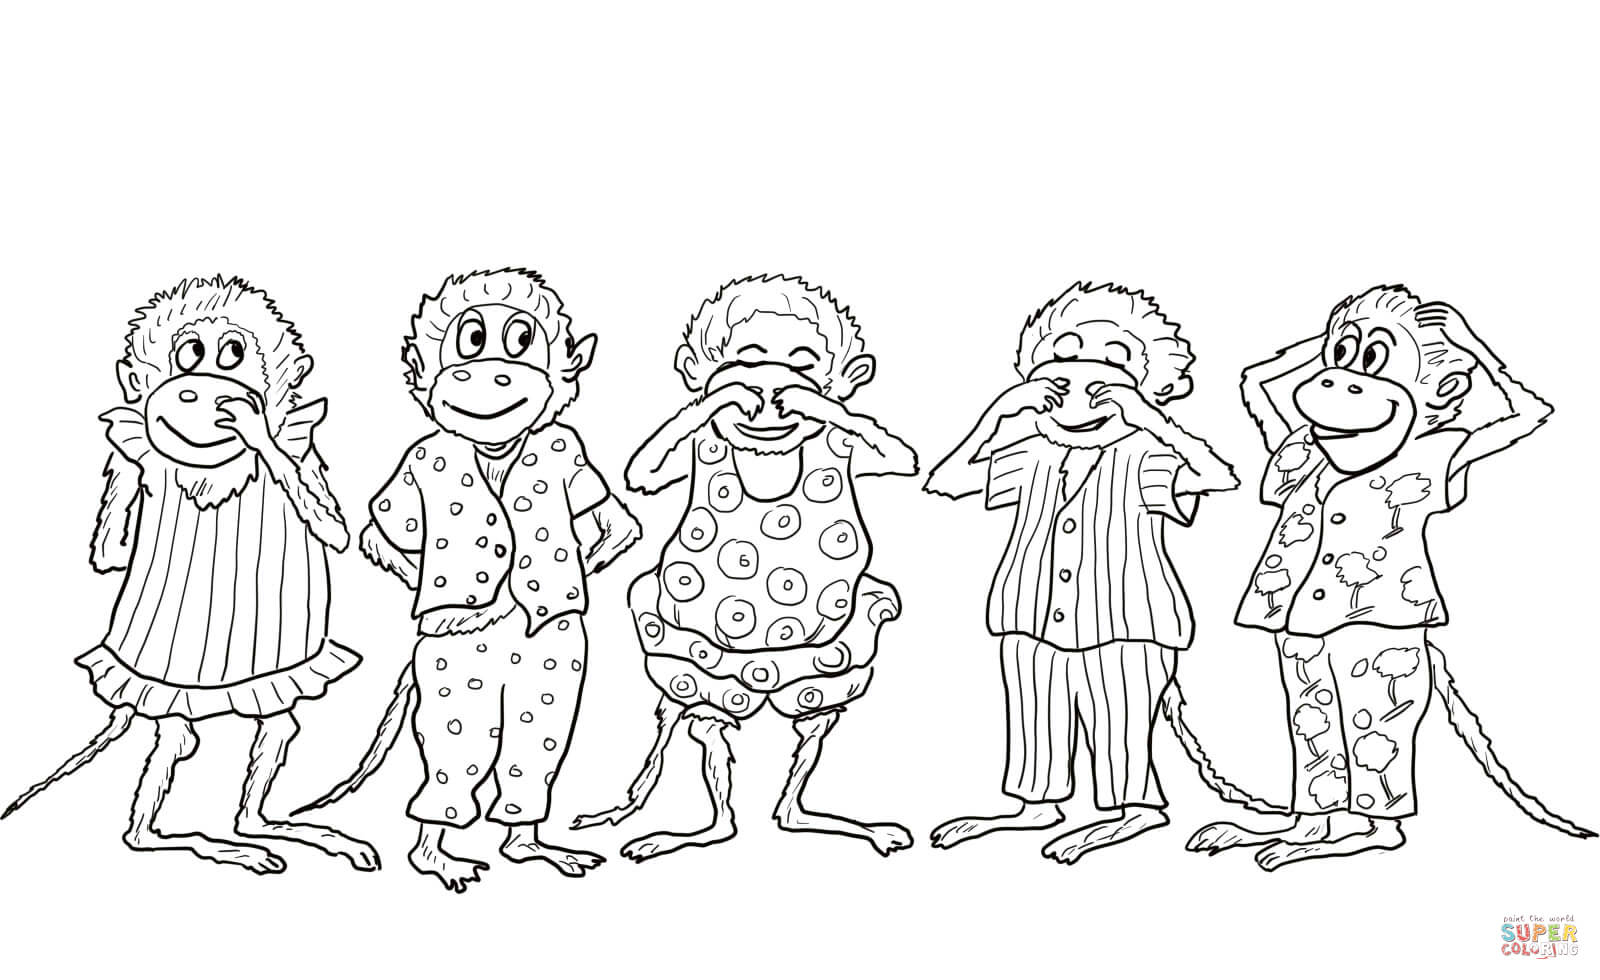 Coloring Pages Of Monkeys Five Little Monkeys Jumping On The Bed Coloring Page Free